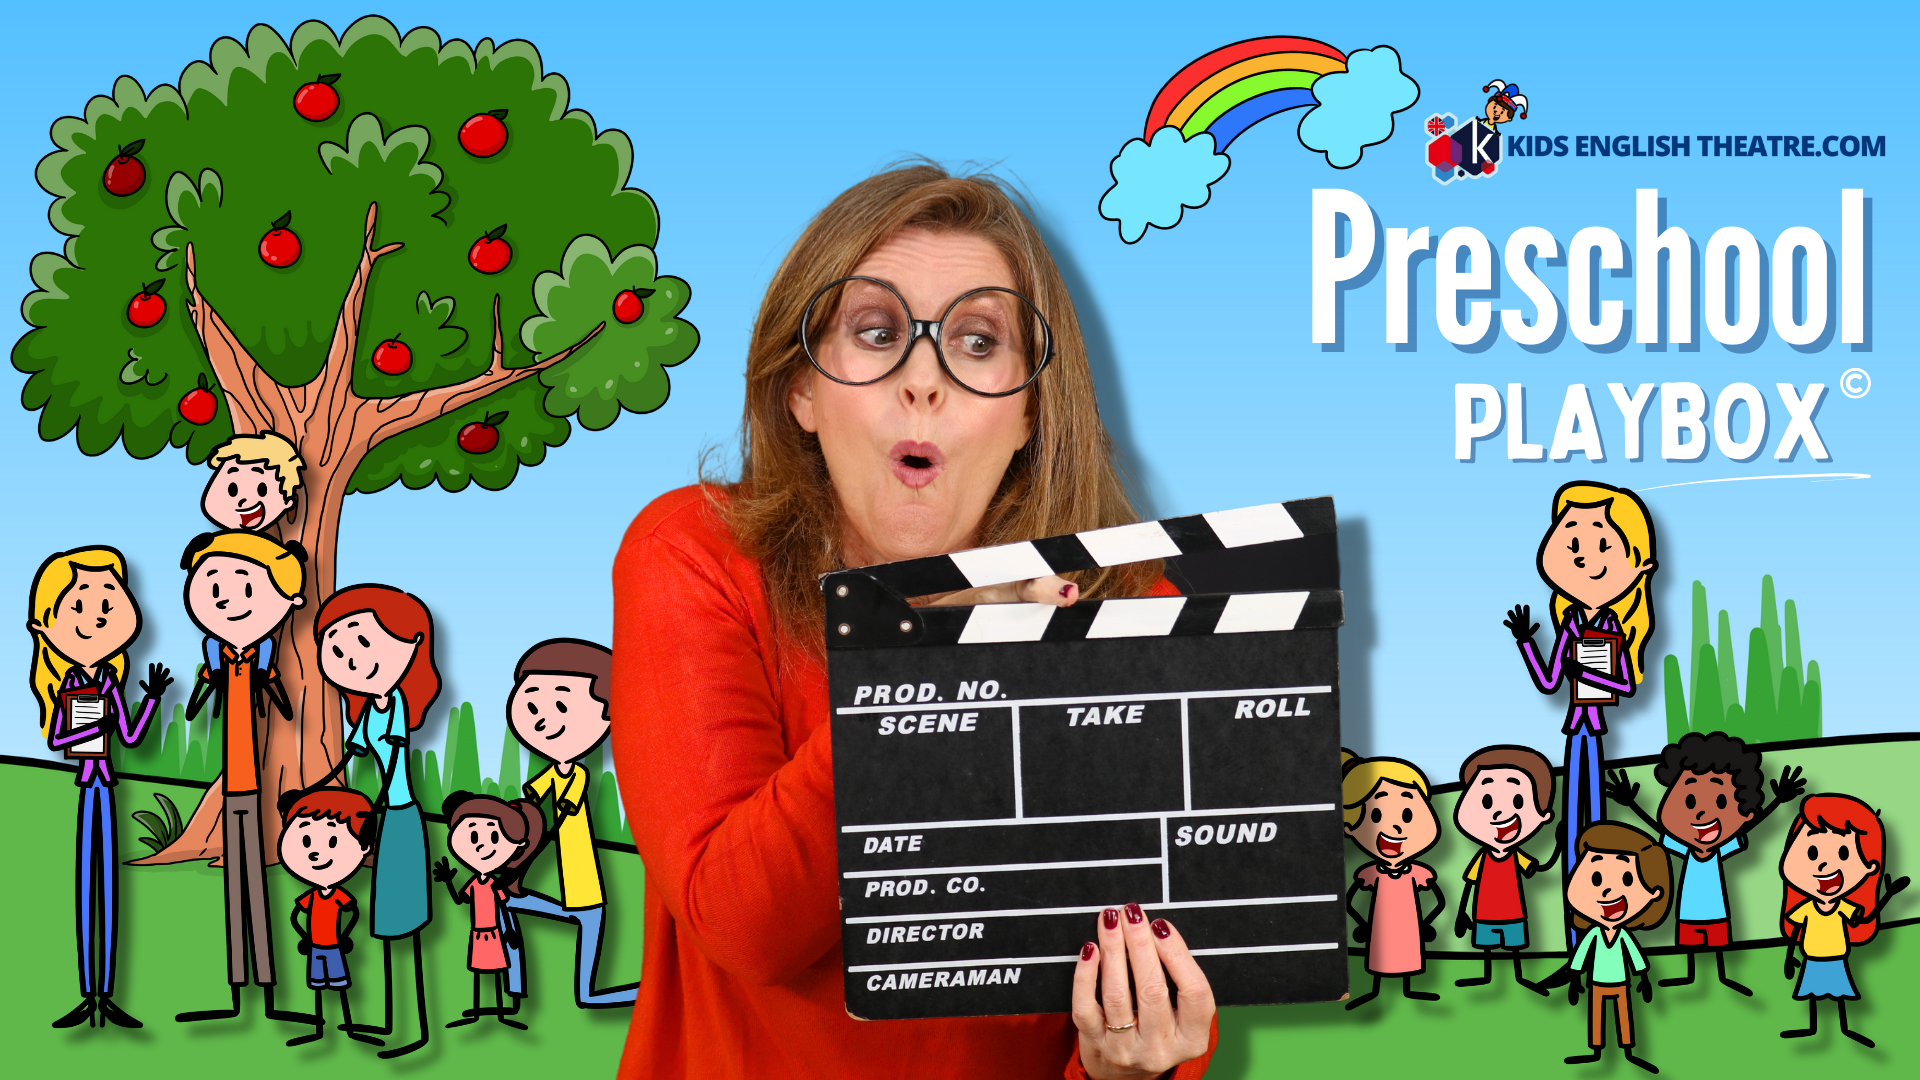 preschool playbox landing page images (1920 × 1080 px) (1920 × 1080 px) (5)